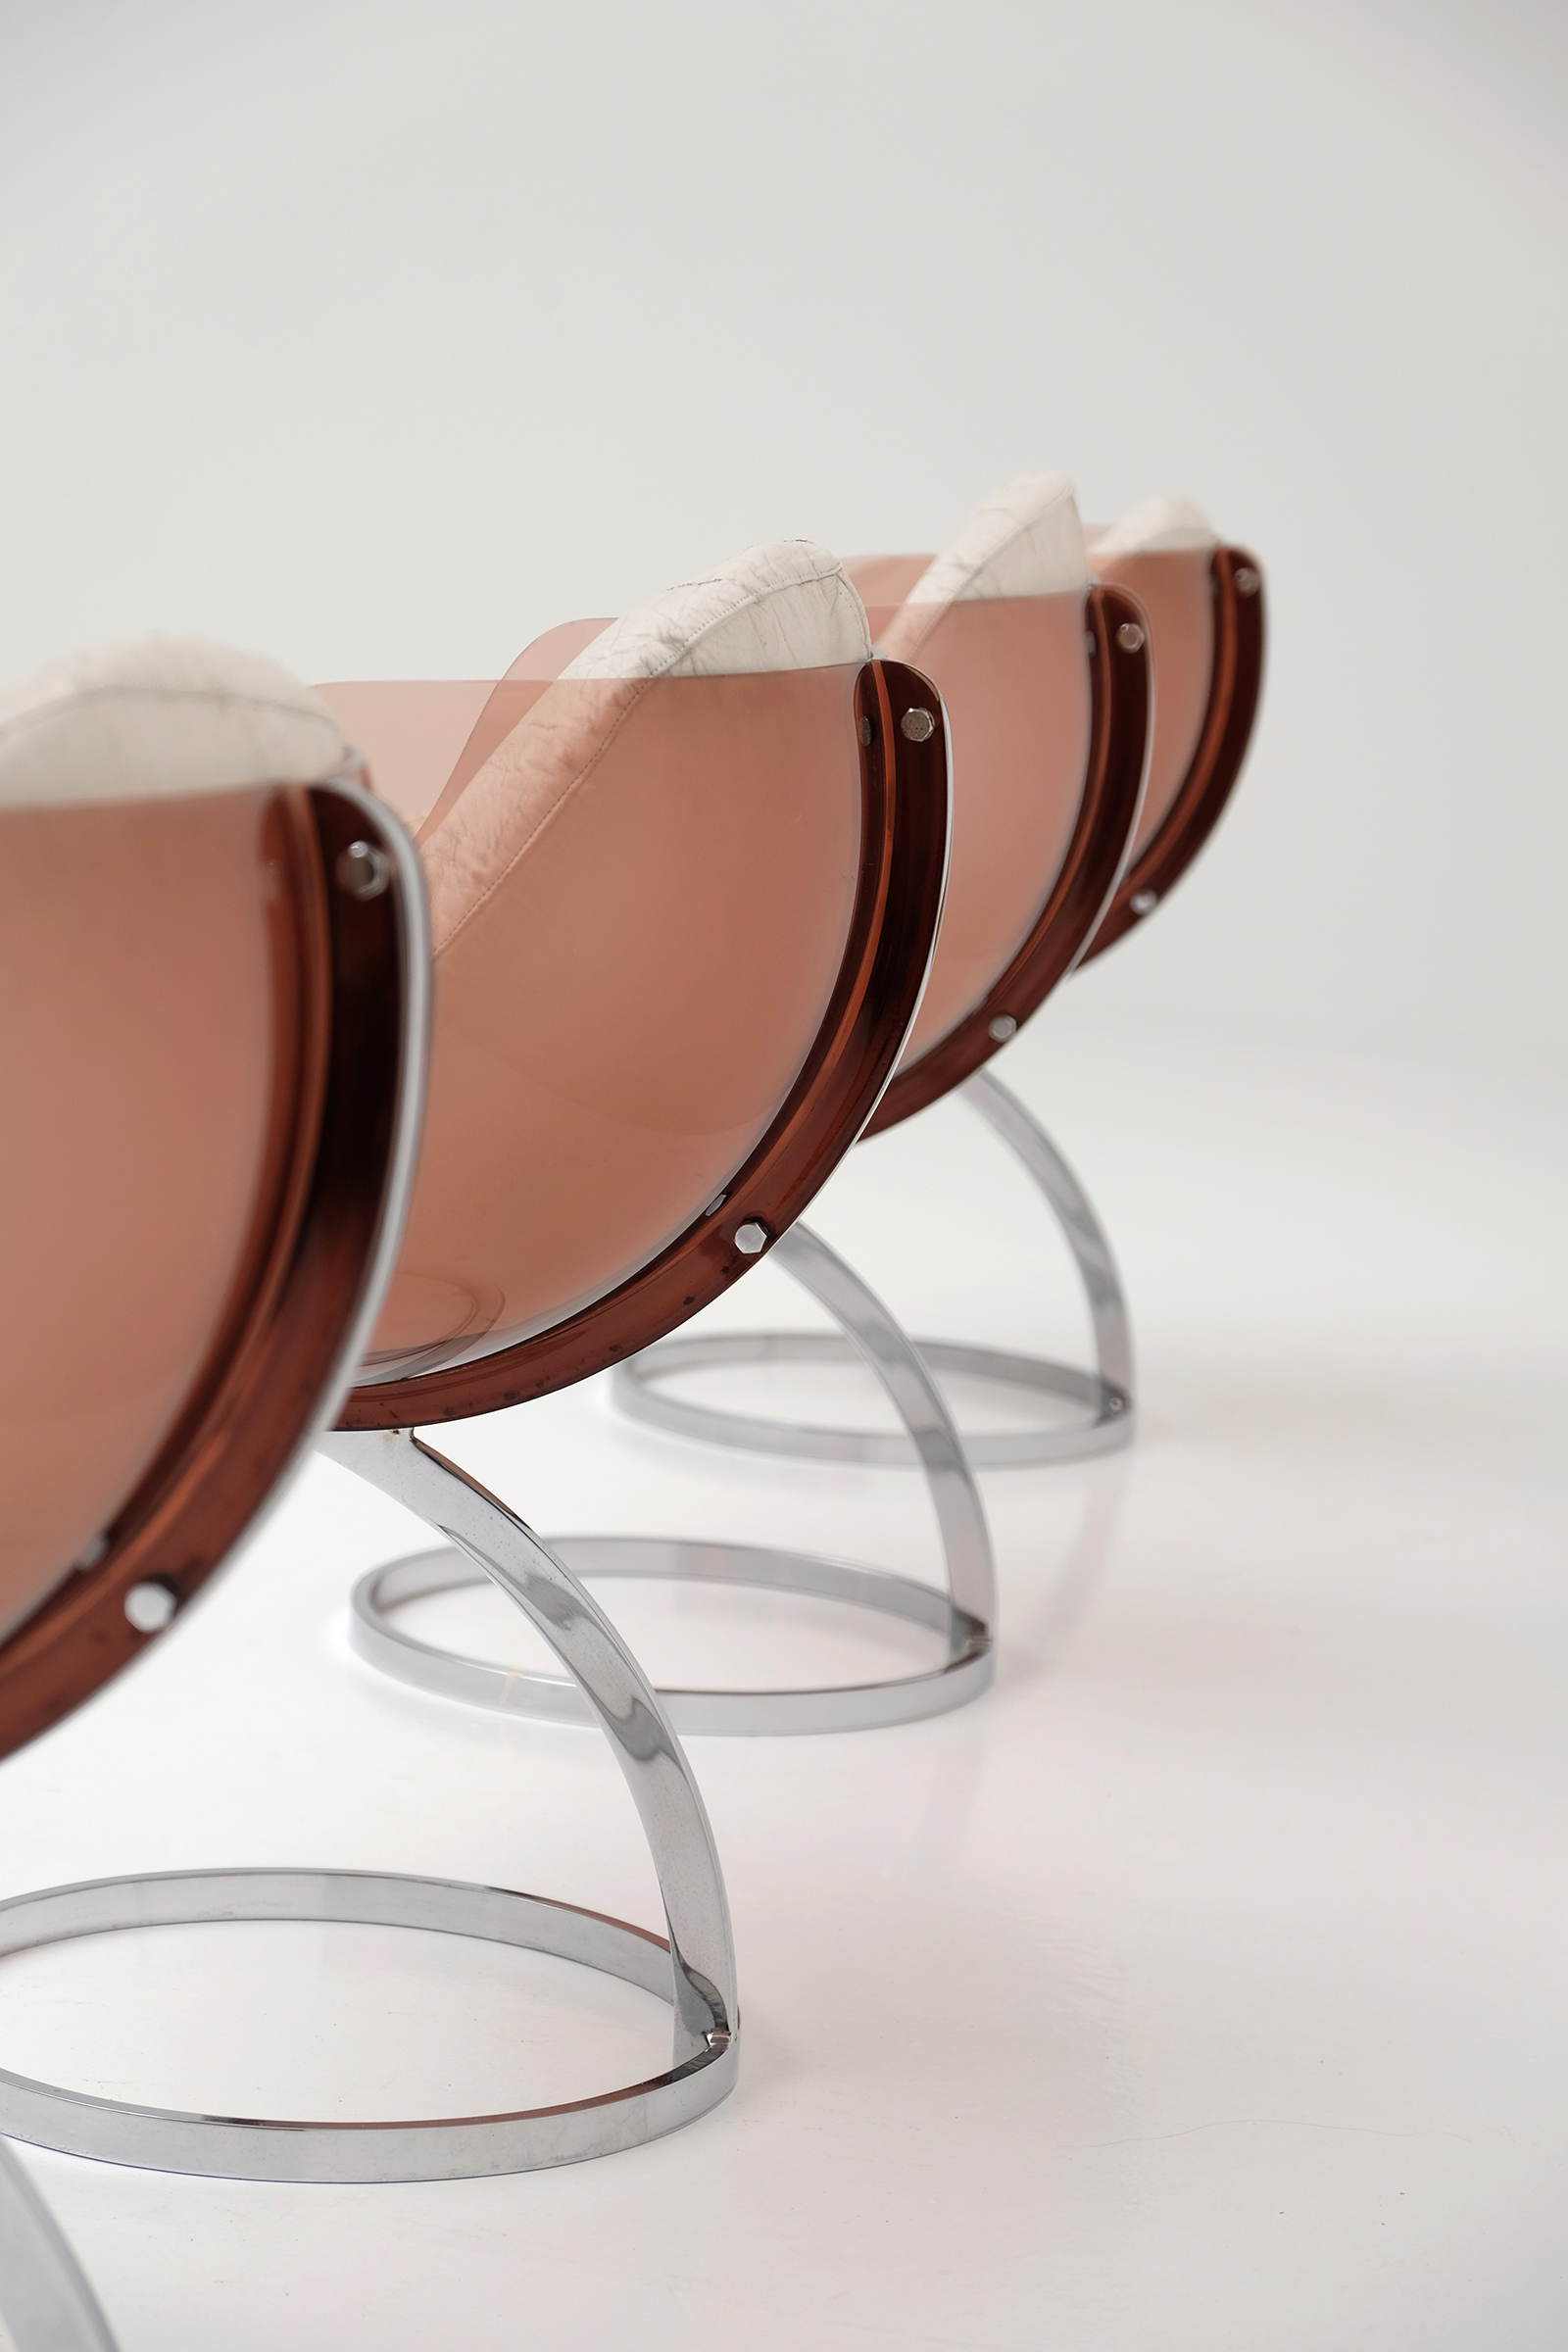 Boris Tabacoff Sphere Chairs Mobillier Modulaire Modernimage 4